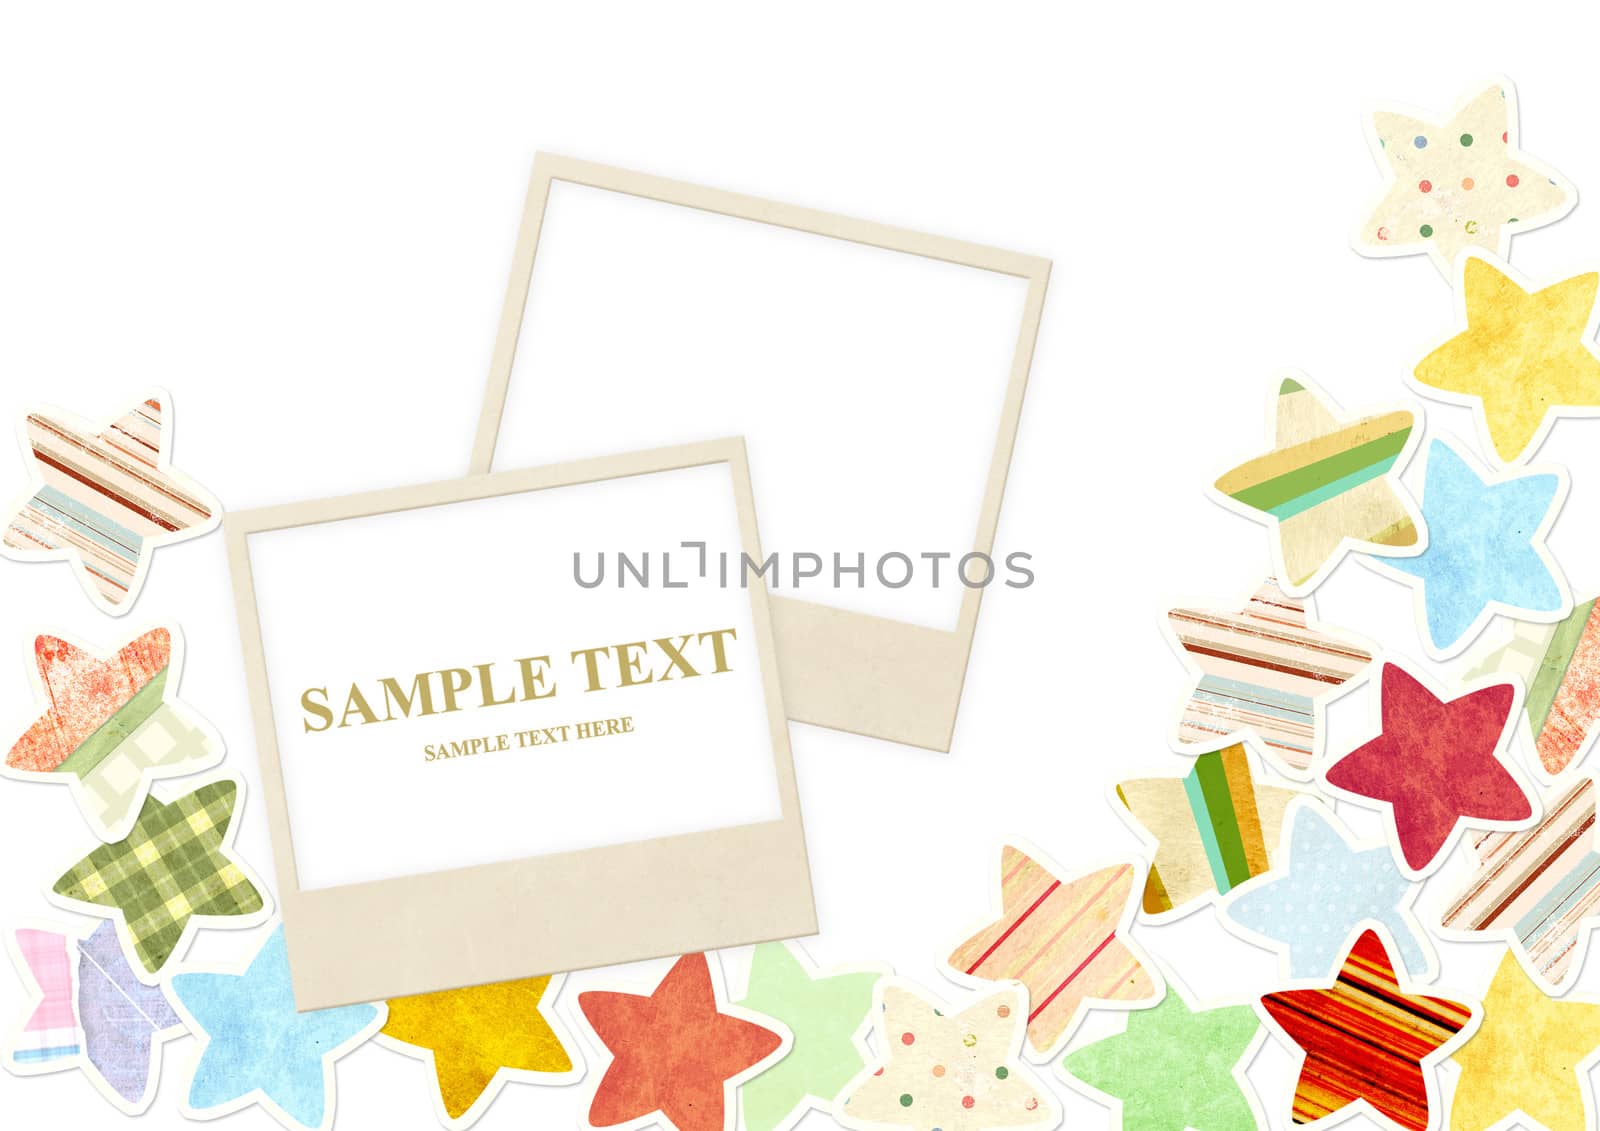 Decorative background with photo and paper stars